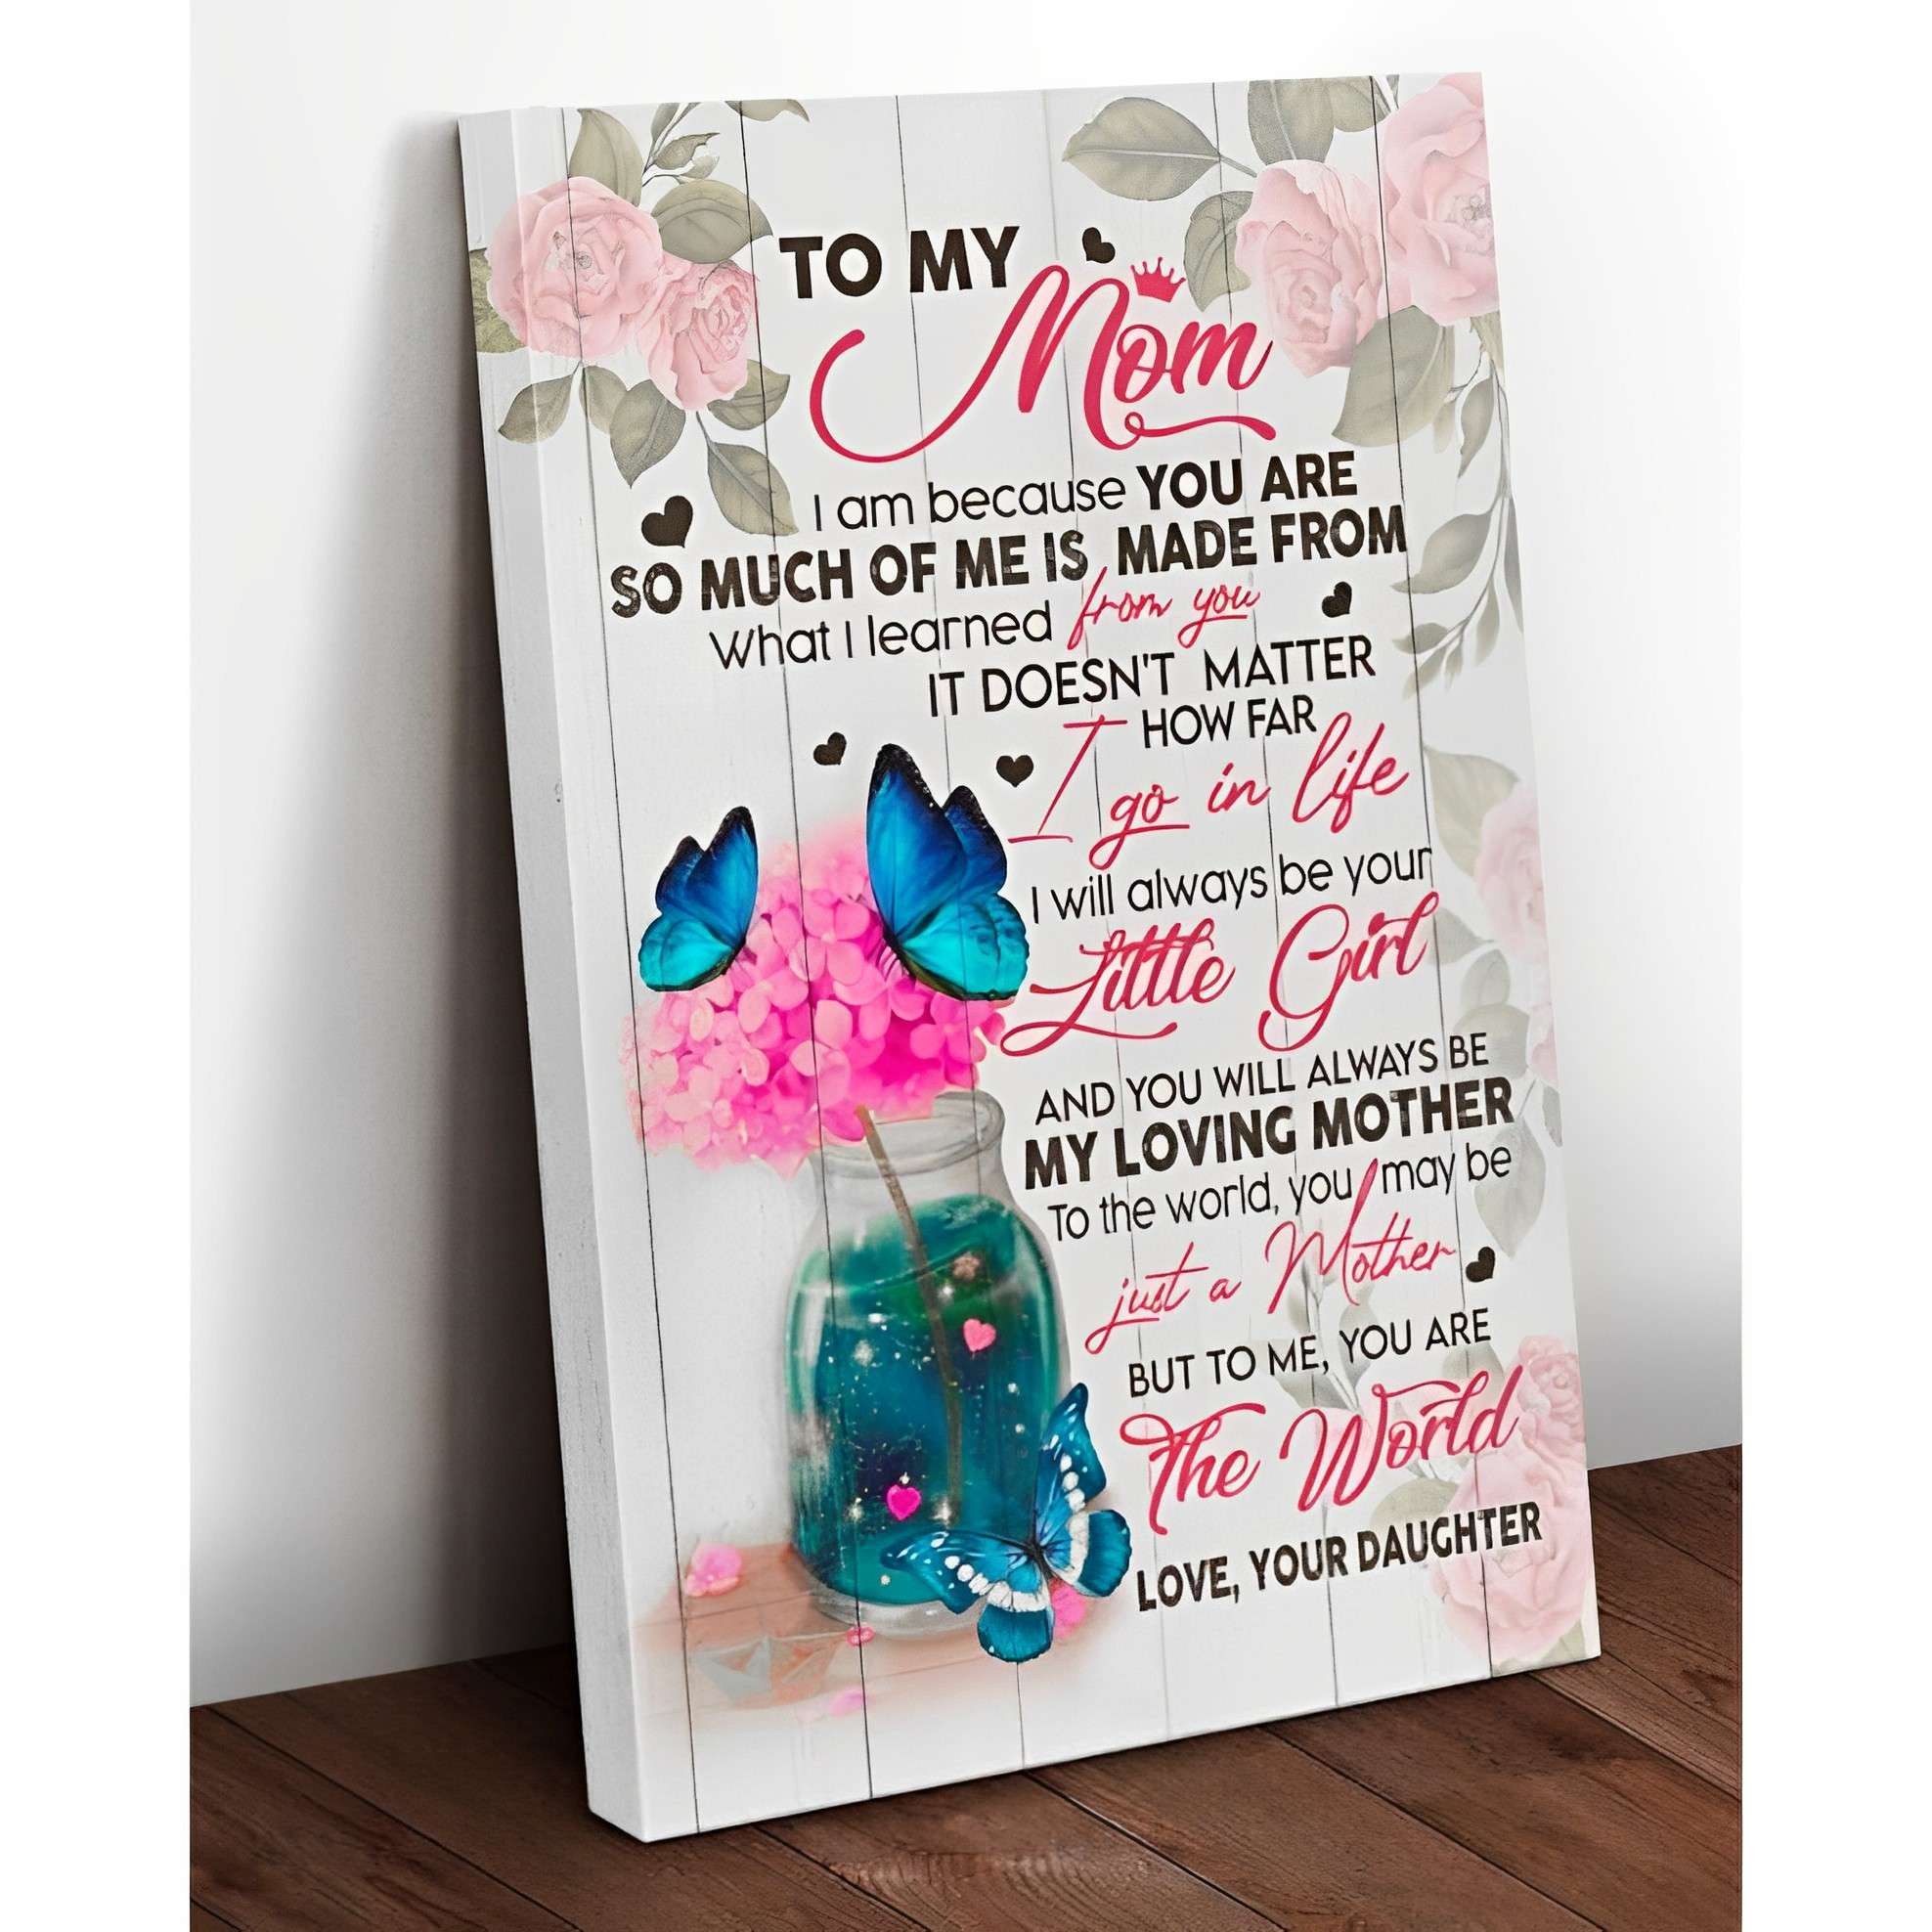 To My Mom Personalized Canvas, Canvas For Mom From Daughter, Loving Mom Canvas